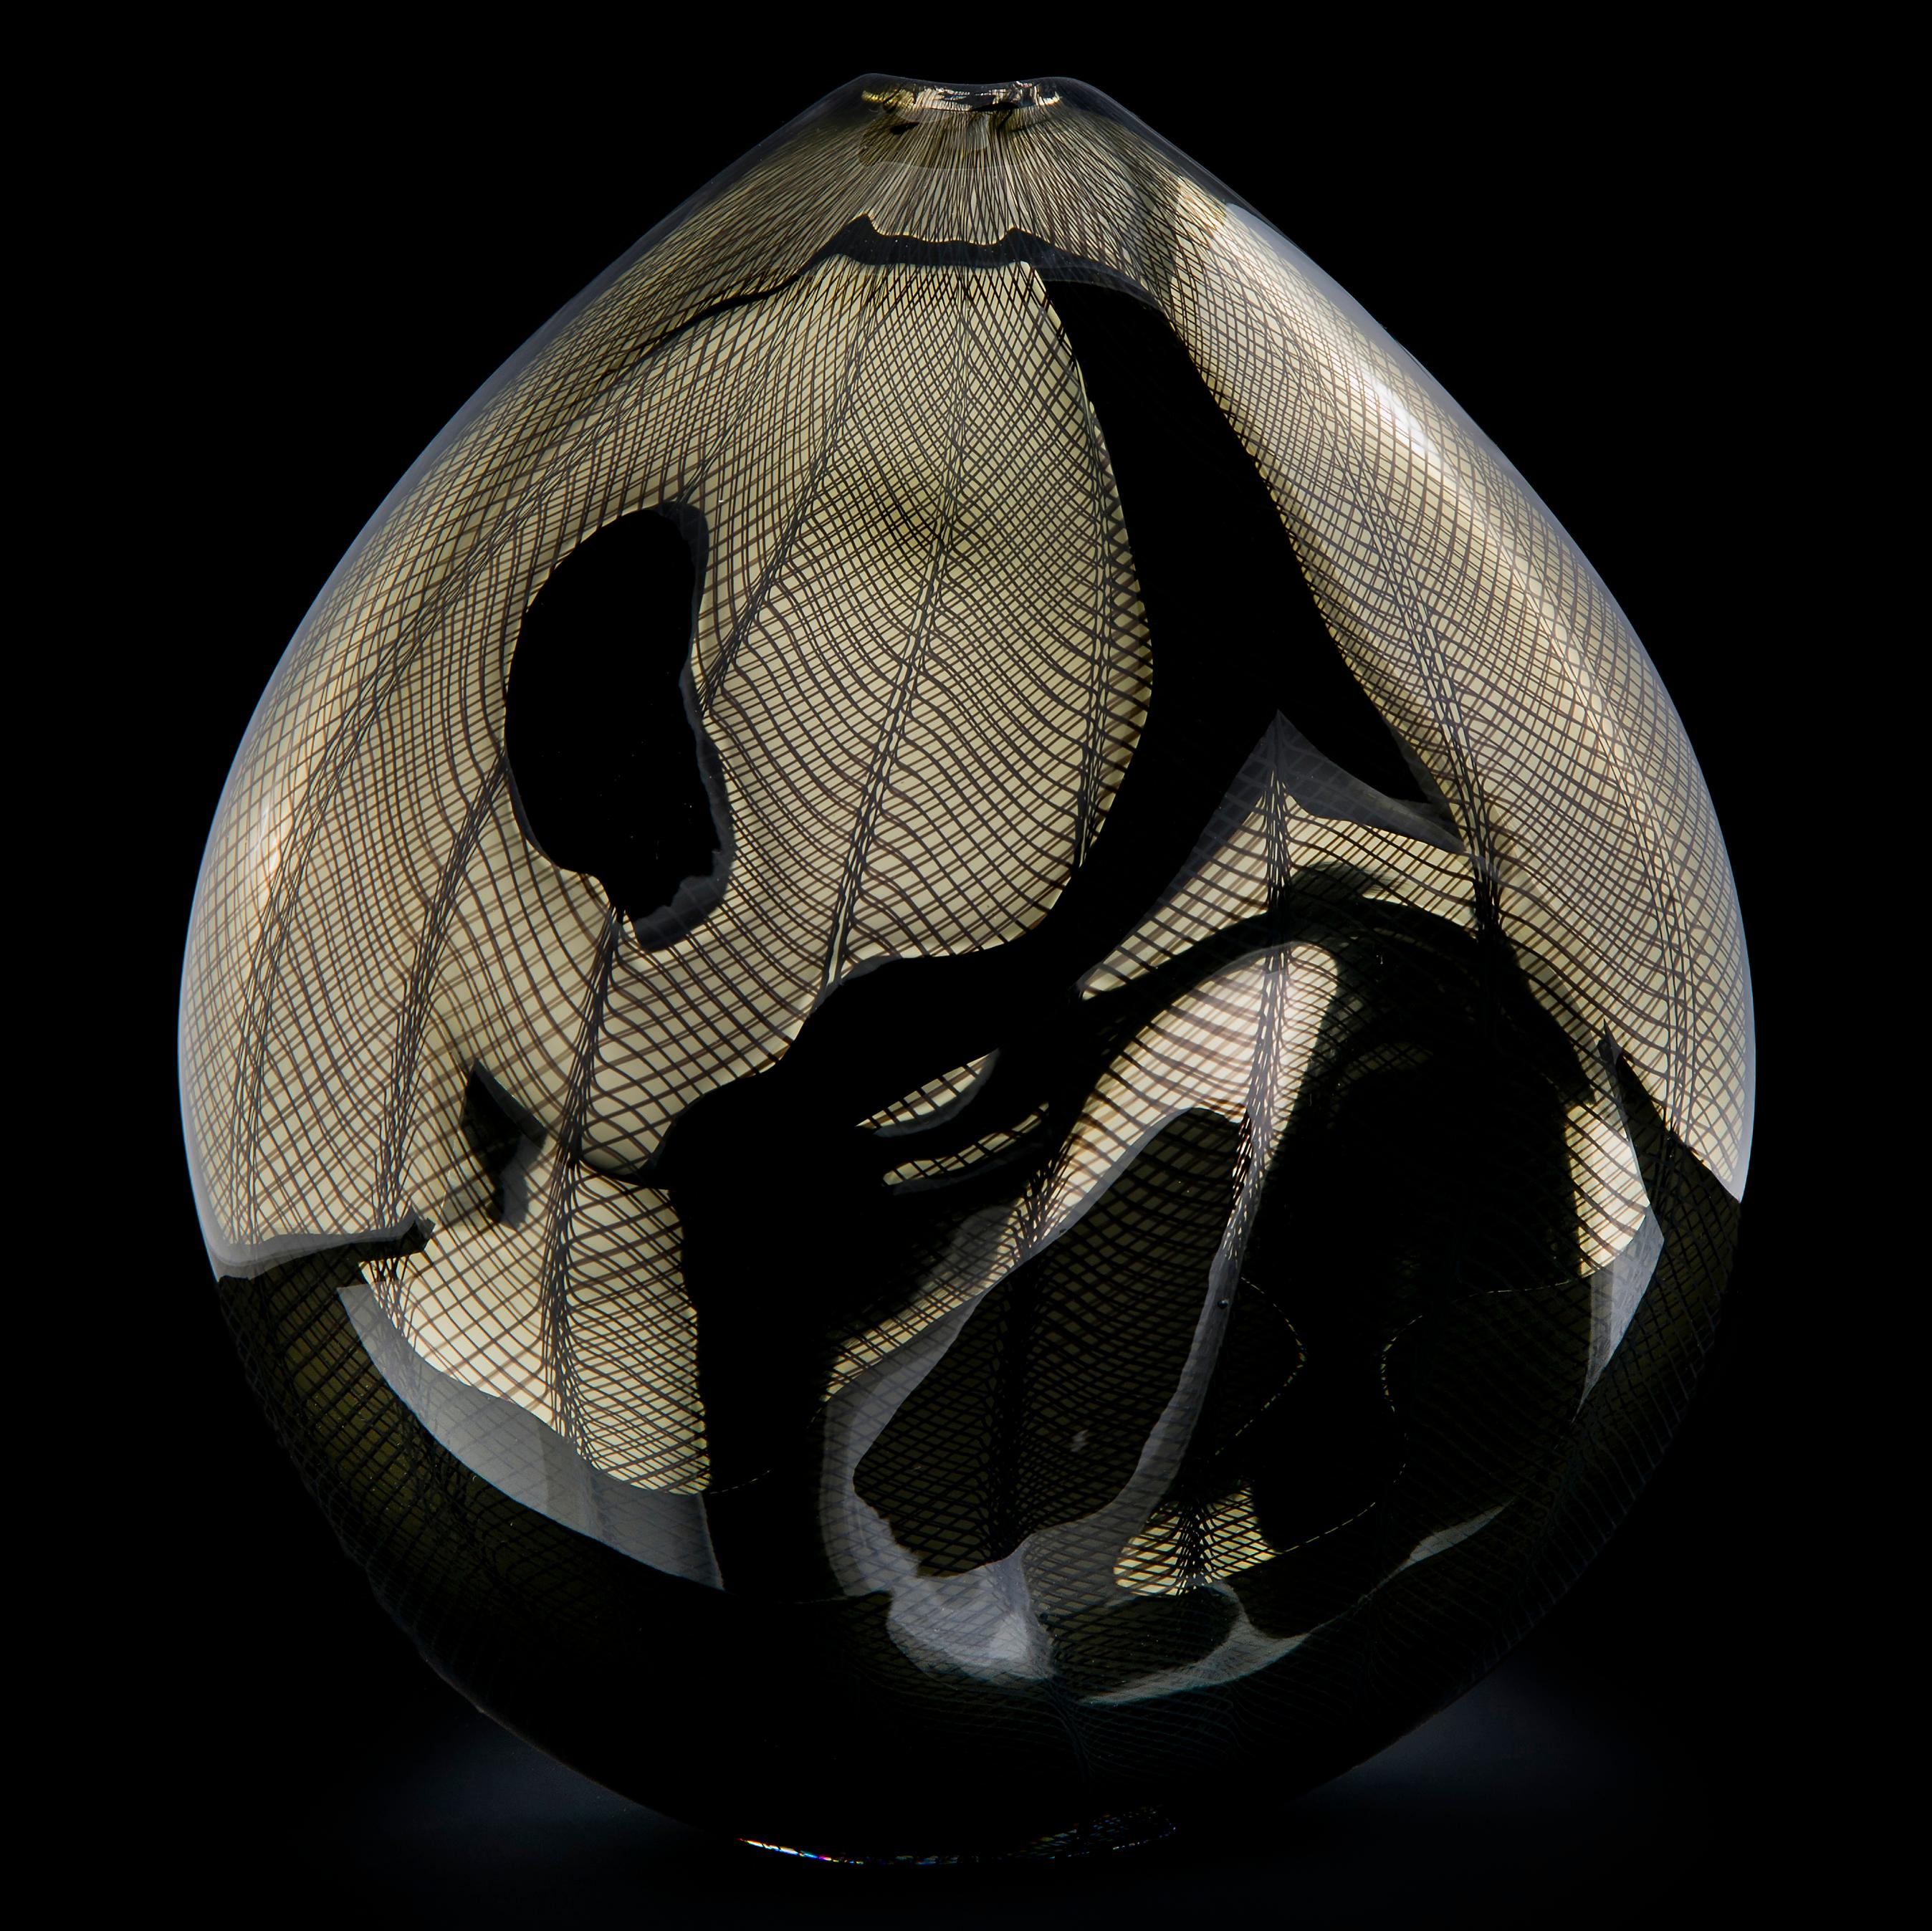 Organic Modern Reflected Tradition 004, a Unique Bronze Glass Sculptural Vessel by Liam Reeves